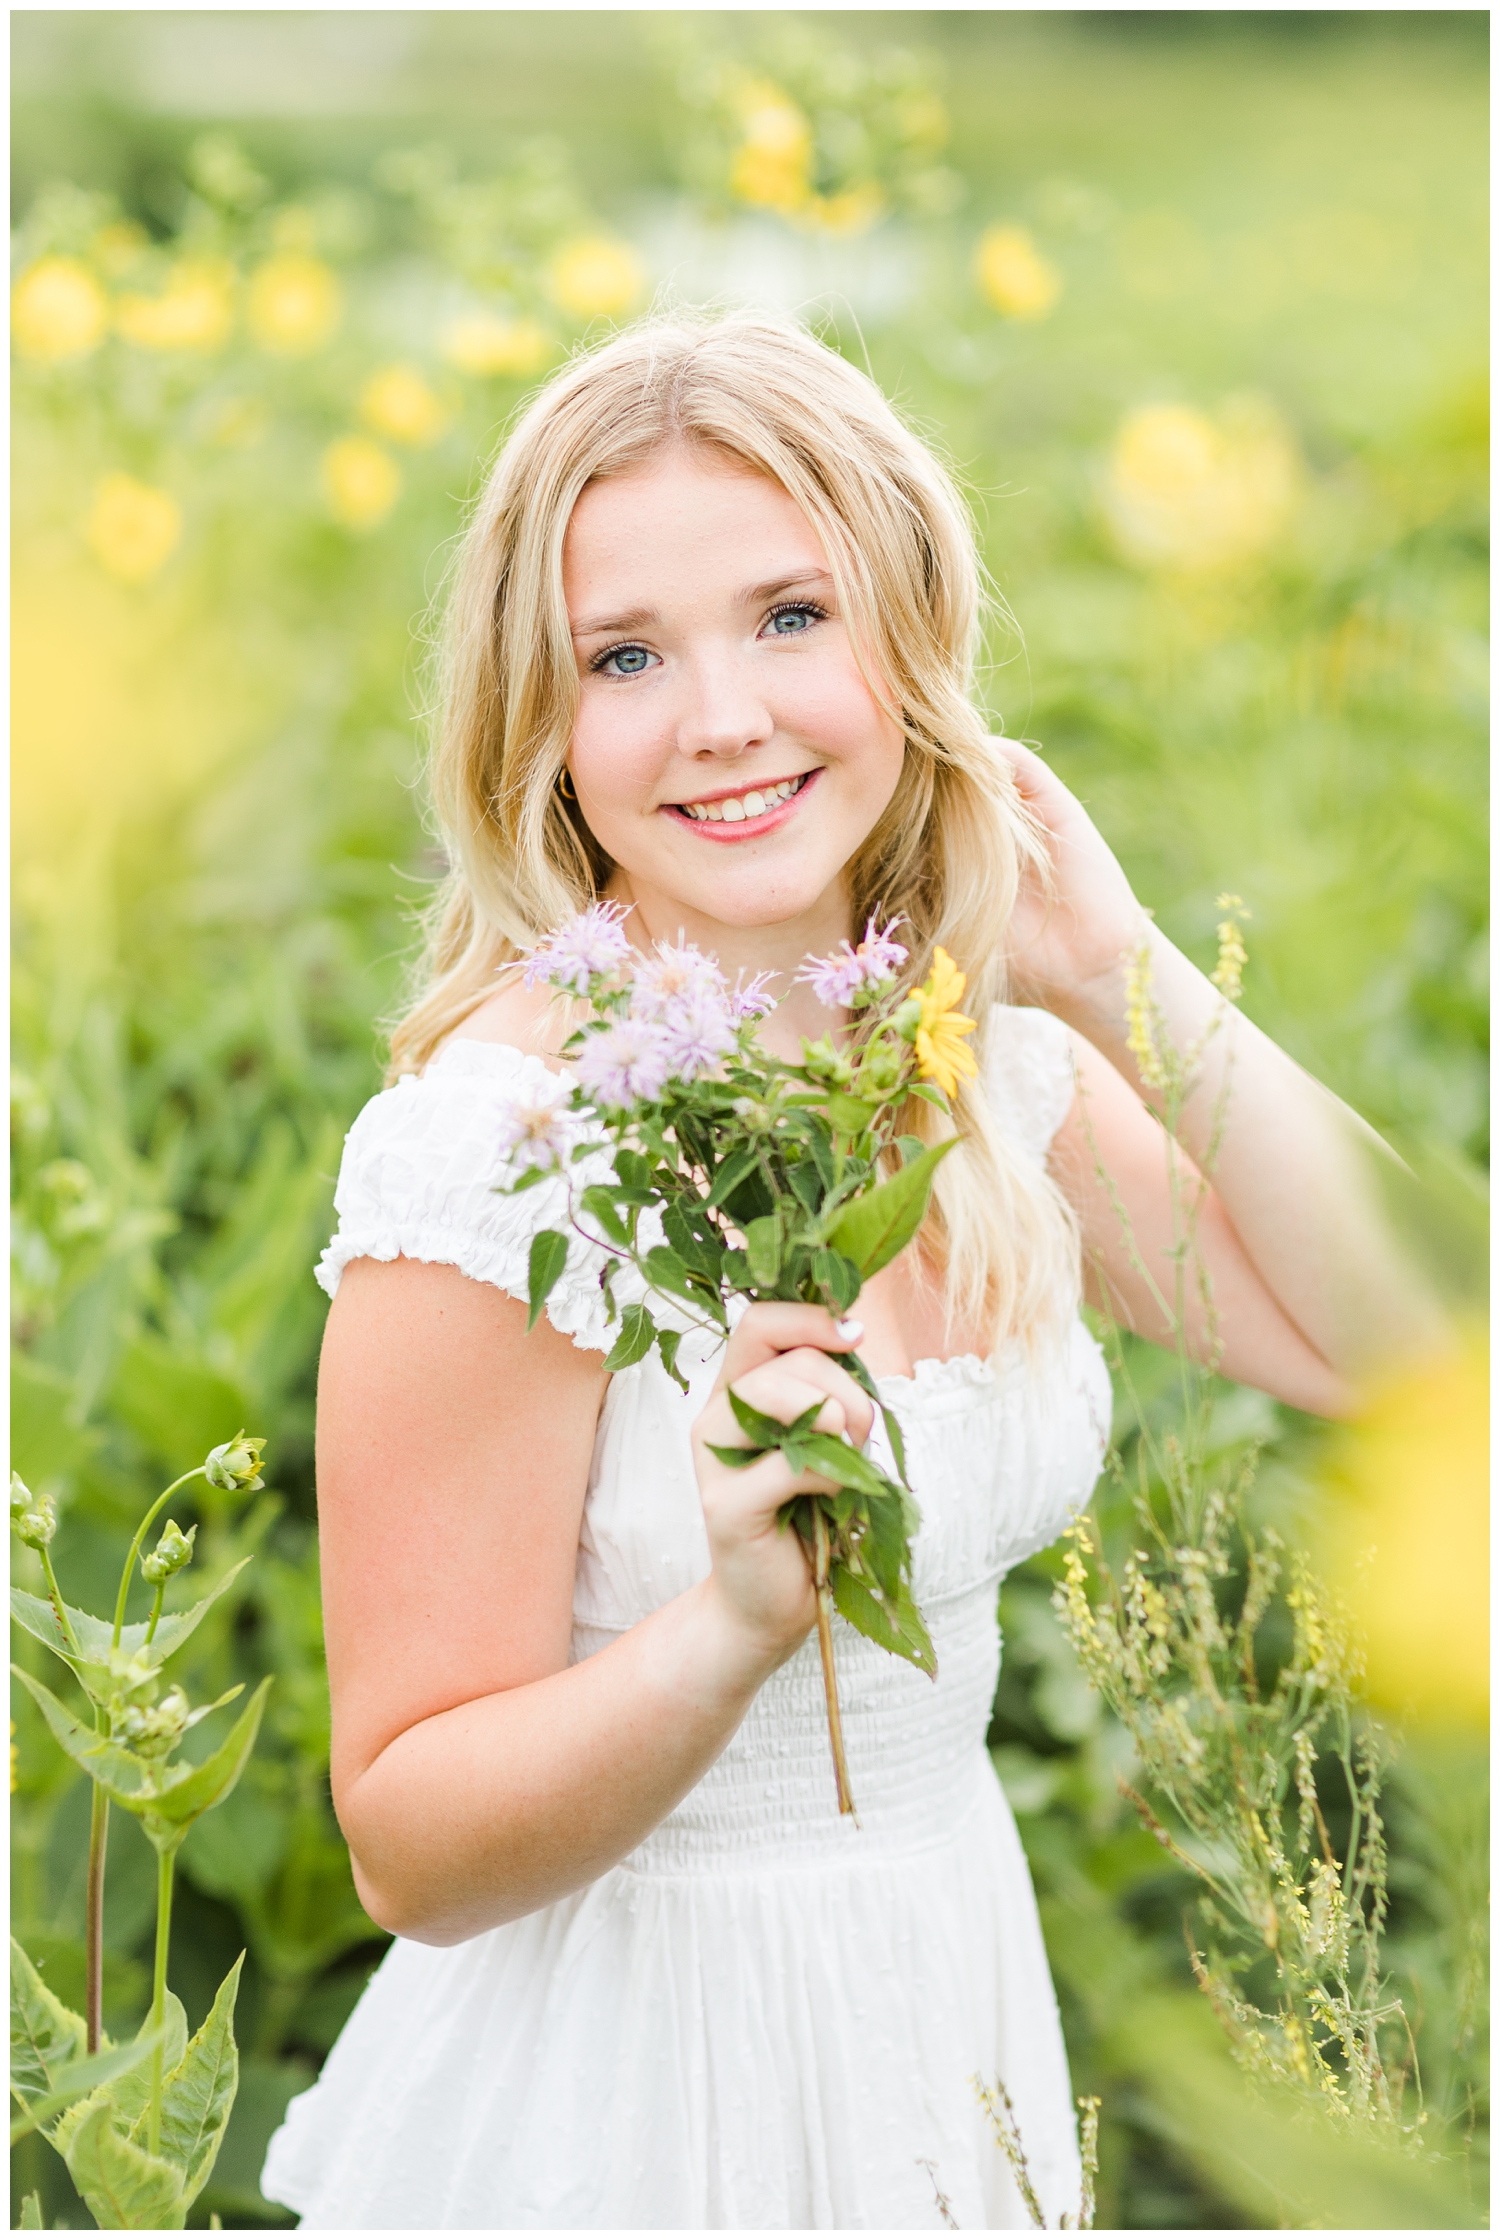 Cassie smiles while holding a bouquet of wildflowers | CB Studio